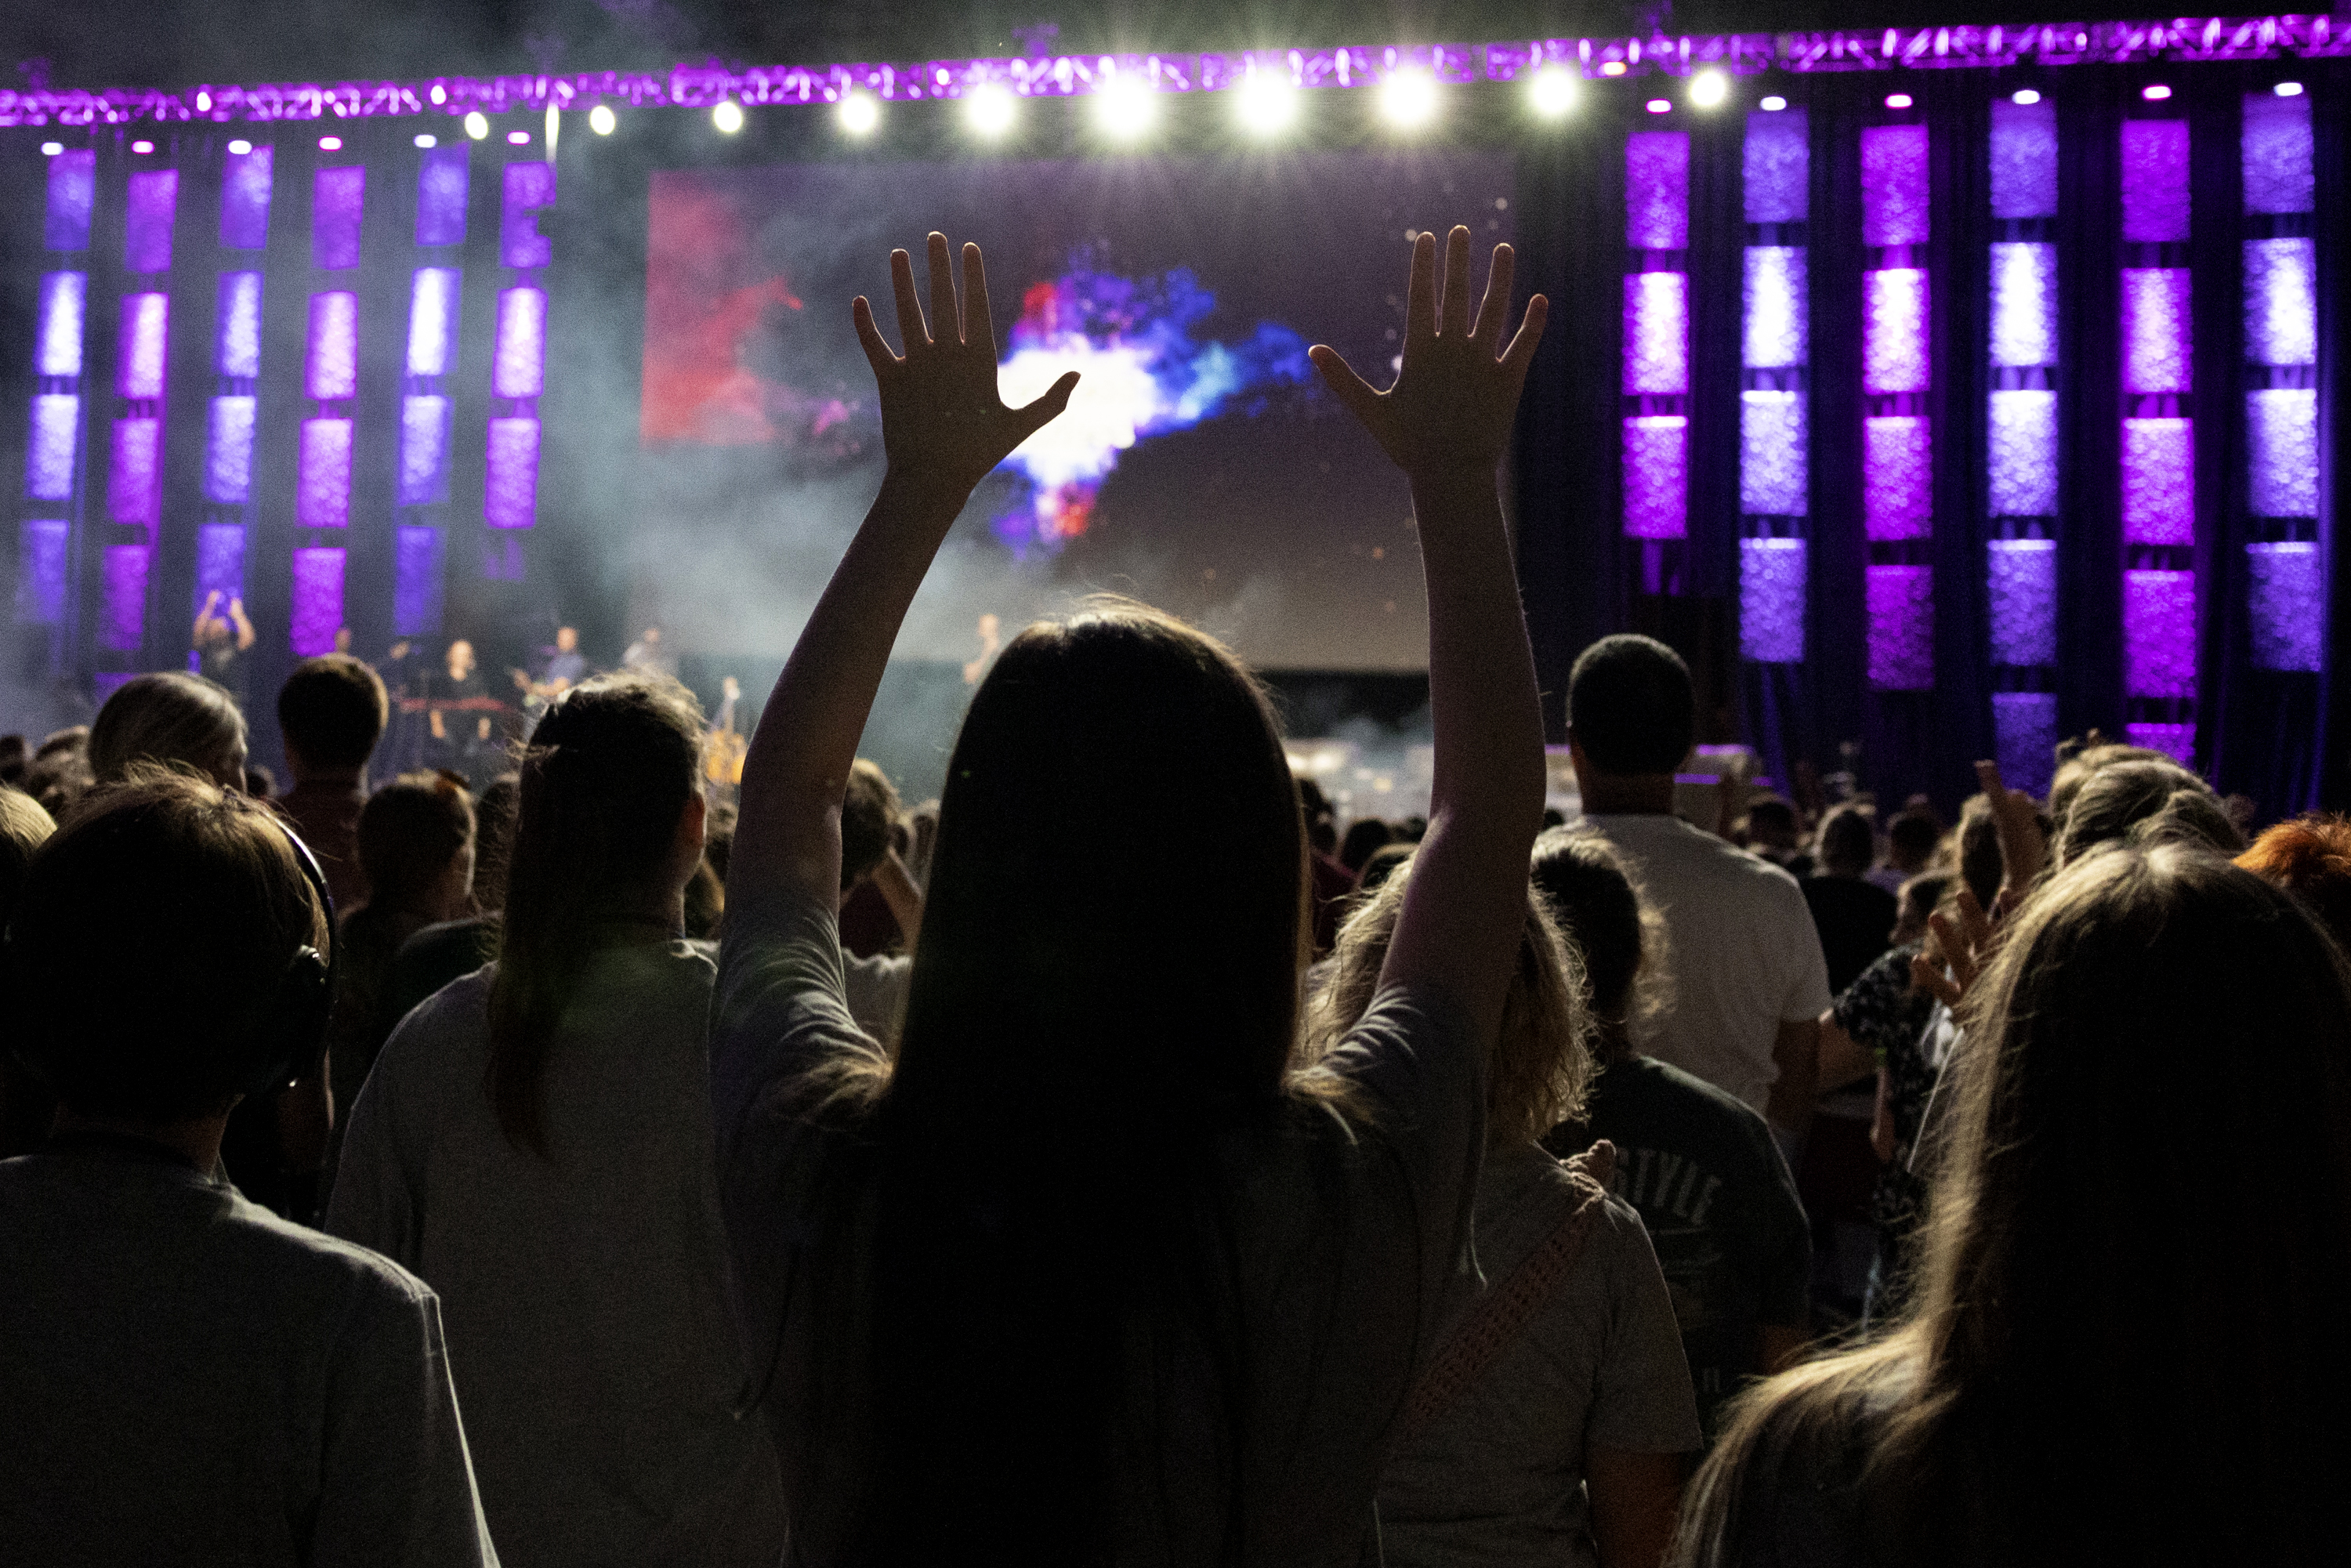 A conference attendee raised their hands during week two of the Steubenville St. Louis Mid-America Youth Conference on July 15 at the Great Southern Bank Arena in Springfield, Missouri.